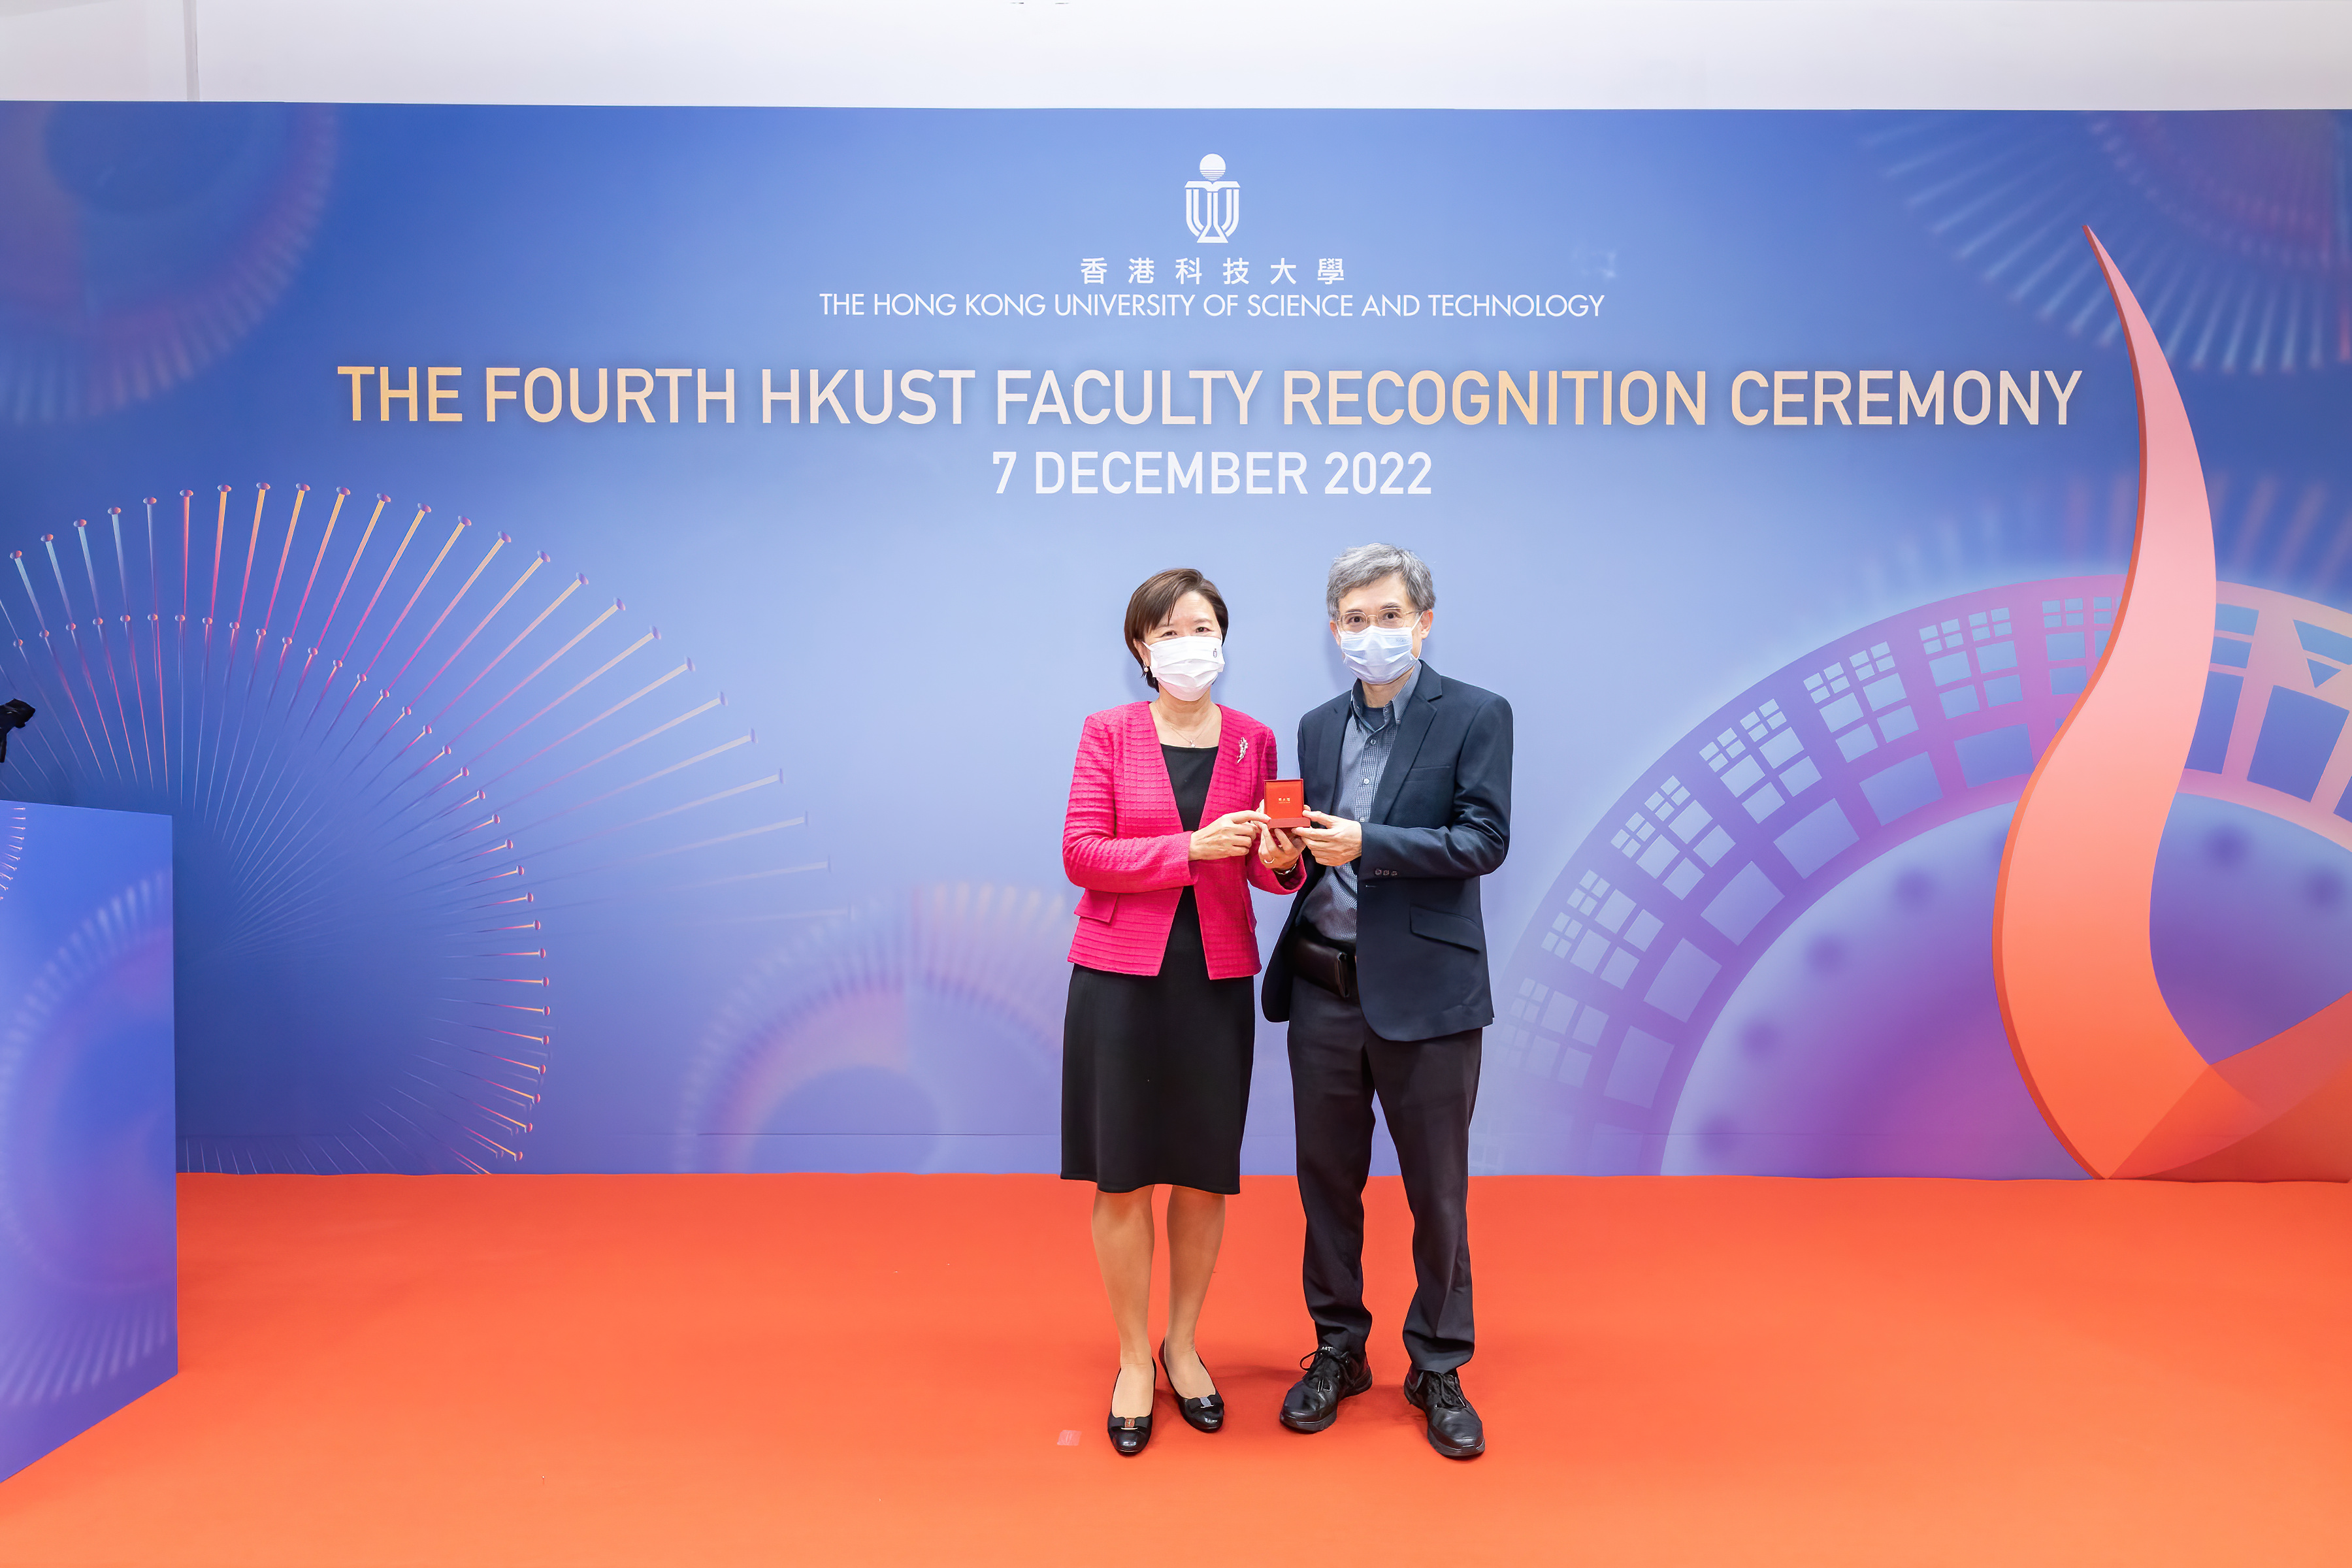 Faculty Recognition Ceremony 2022